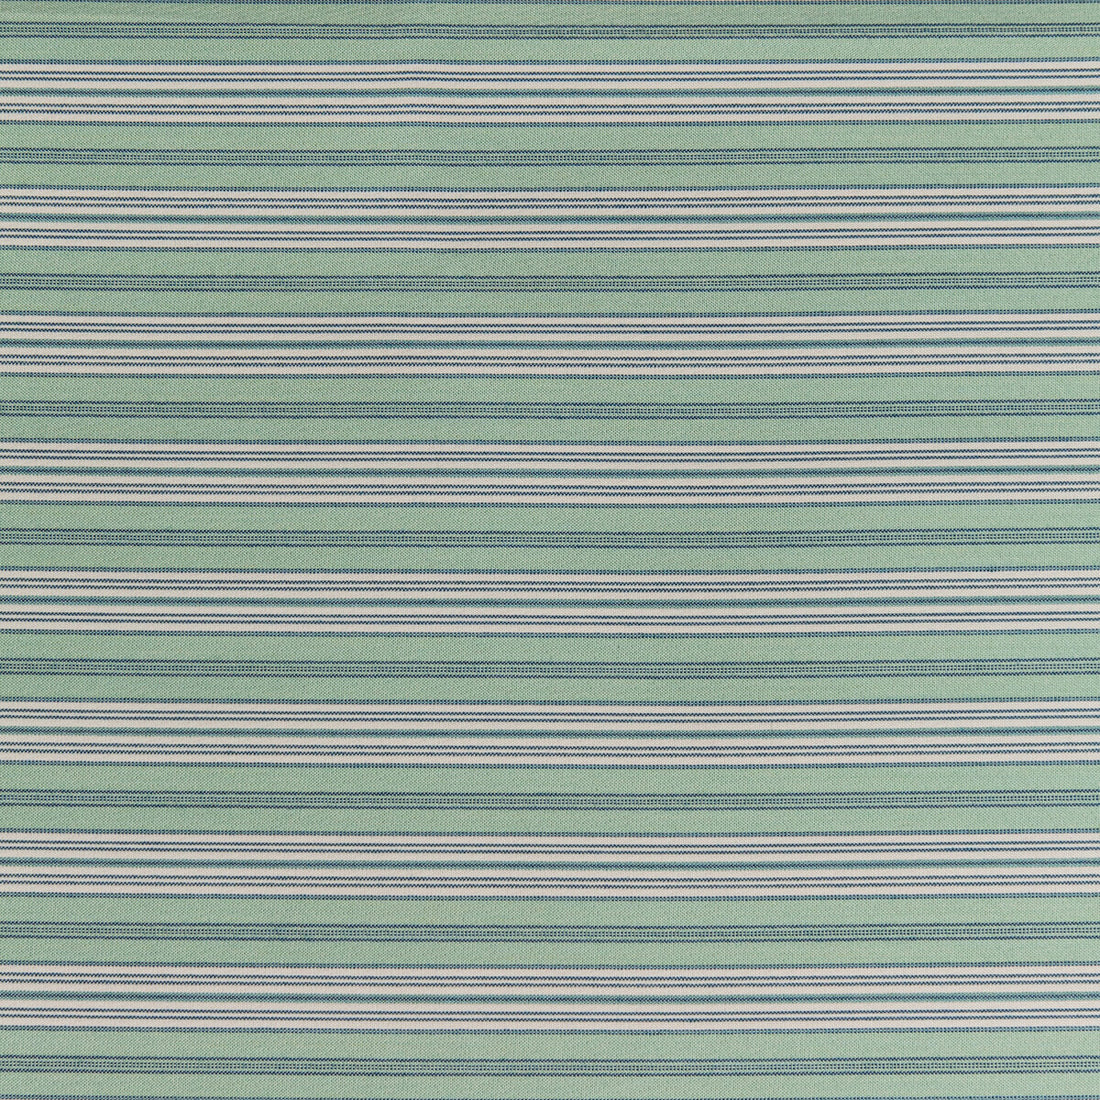 Hull Stripe fabric in mint color - pattern 35827.313.0 - by Kravet Design in the Indoor / Outdoor collection